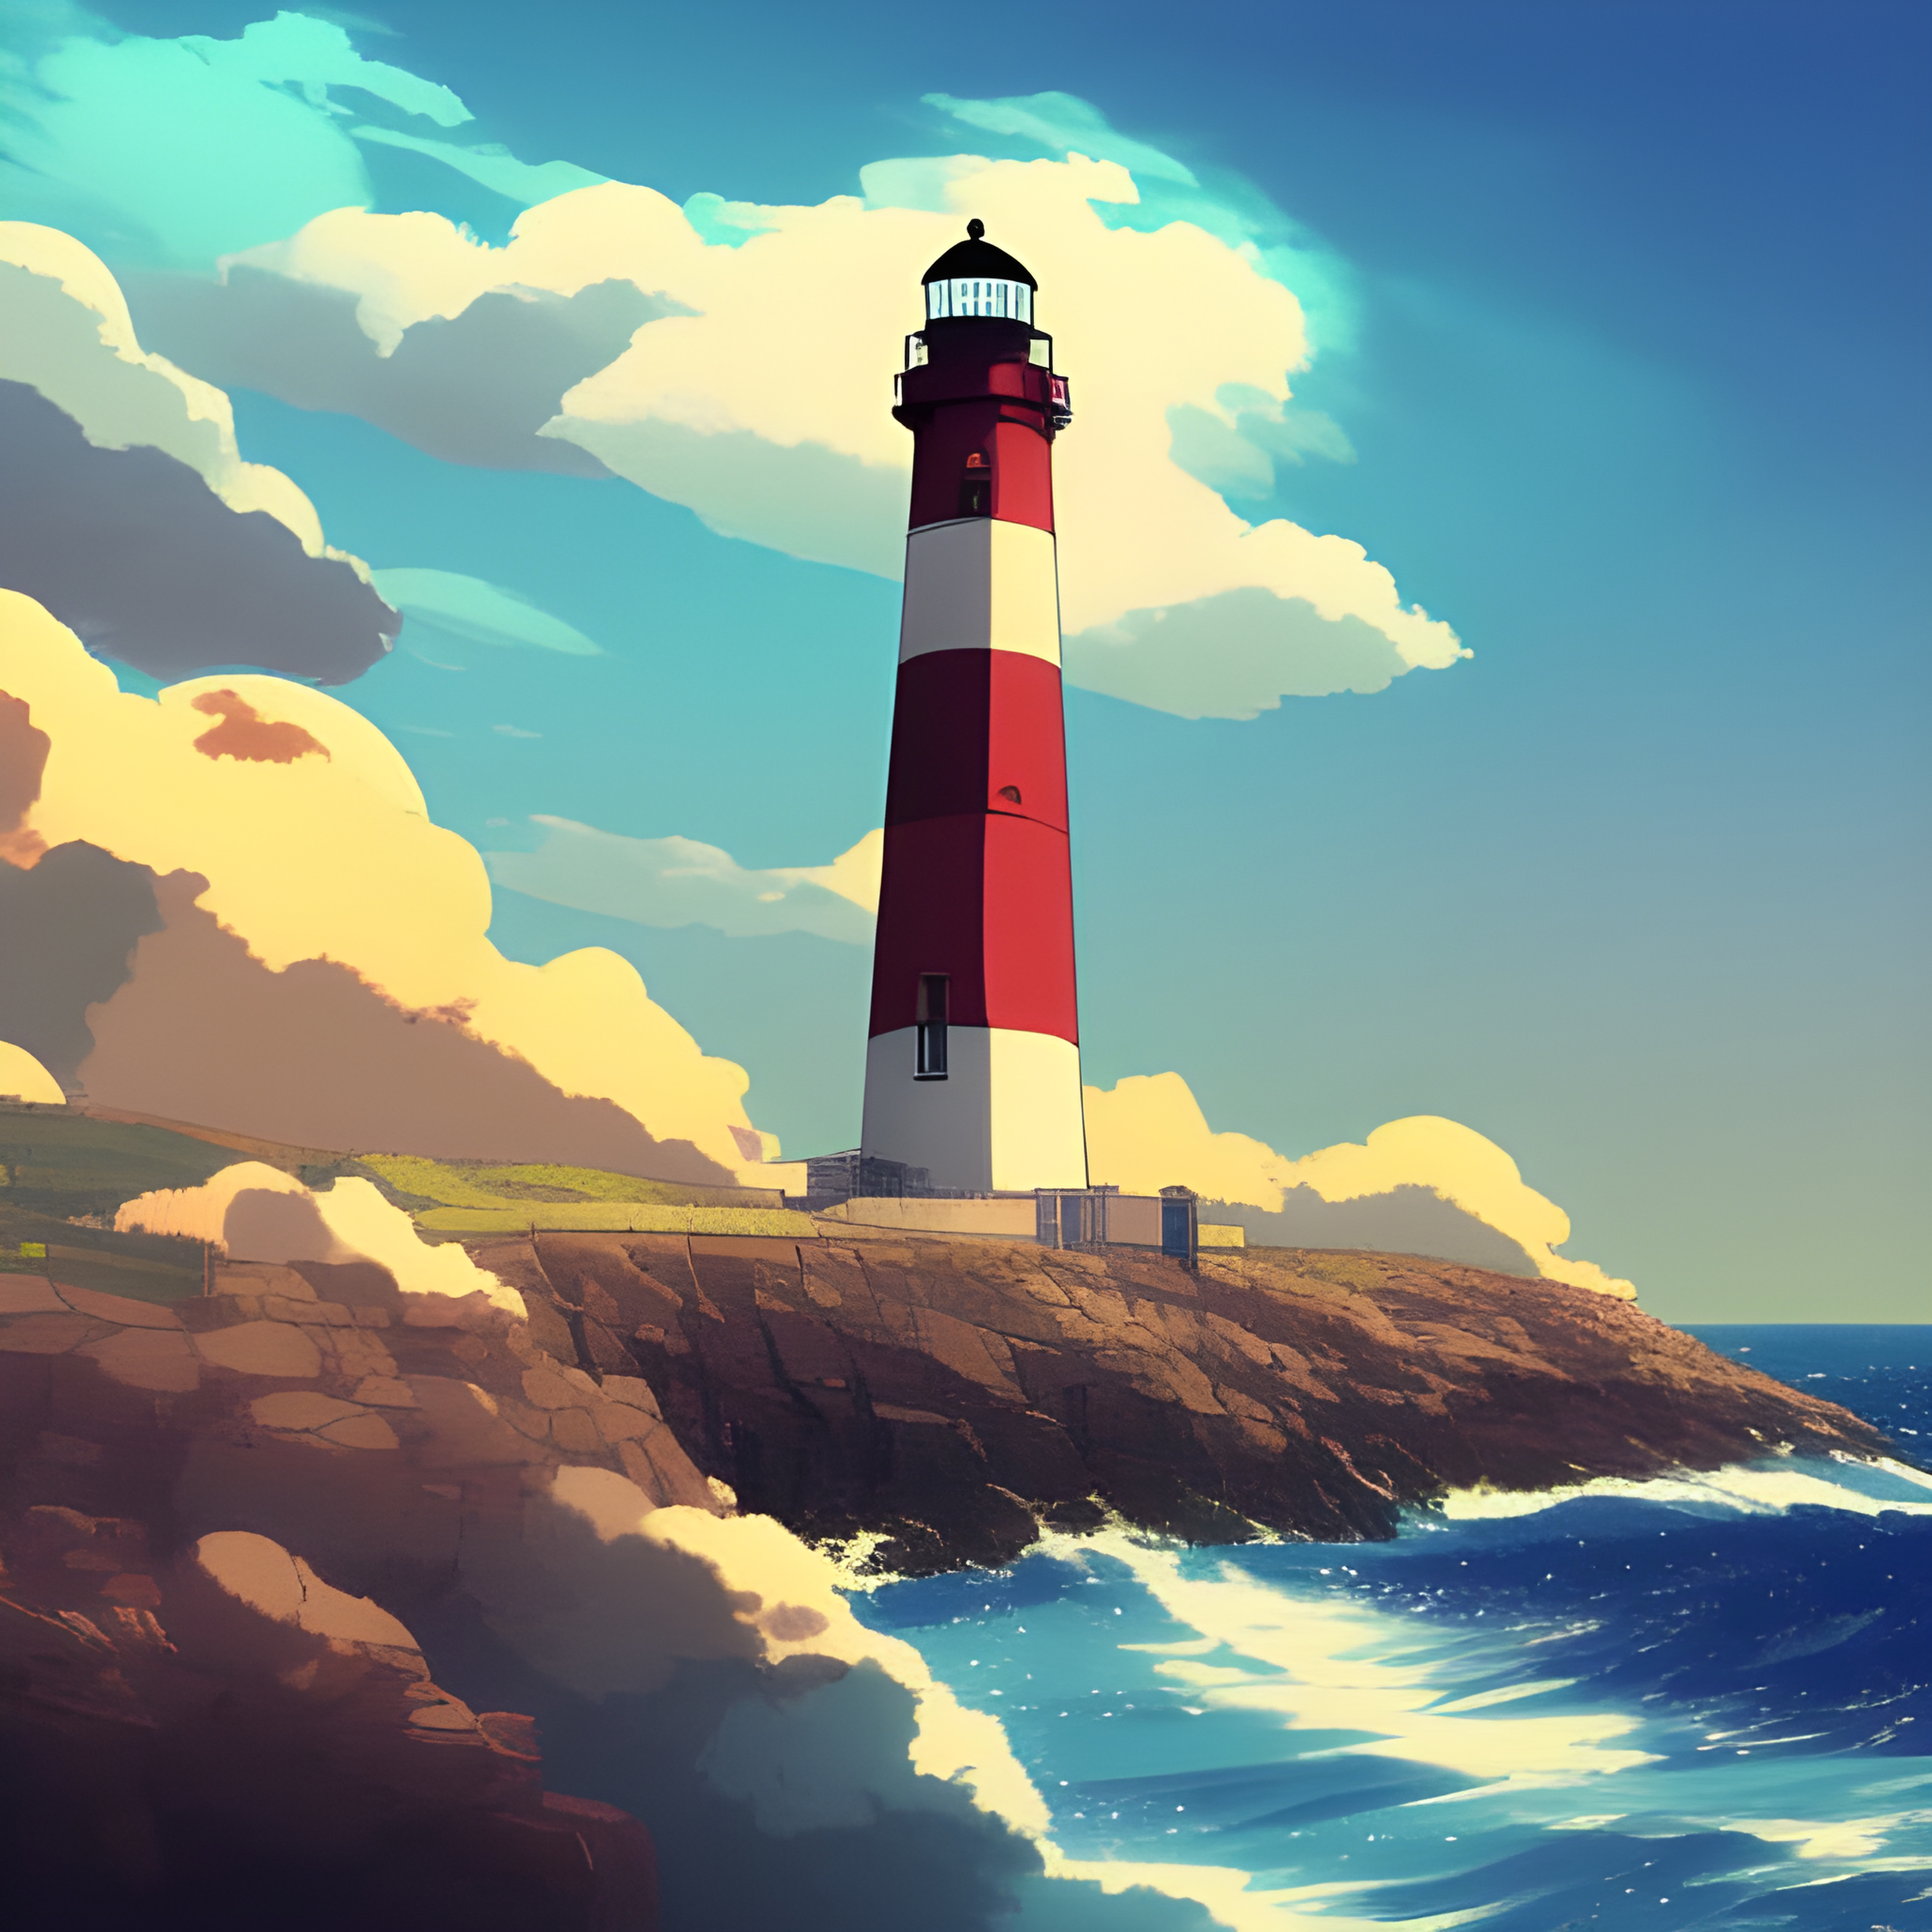 FULL RESOLUTION - Original Montauk Lighthouse AI art, before adding "large waves" - created by a computer on on NightCafe Studio with prompt by Oliver Peterson